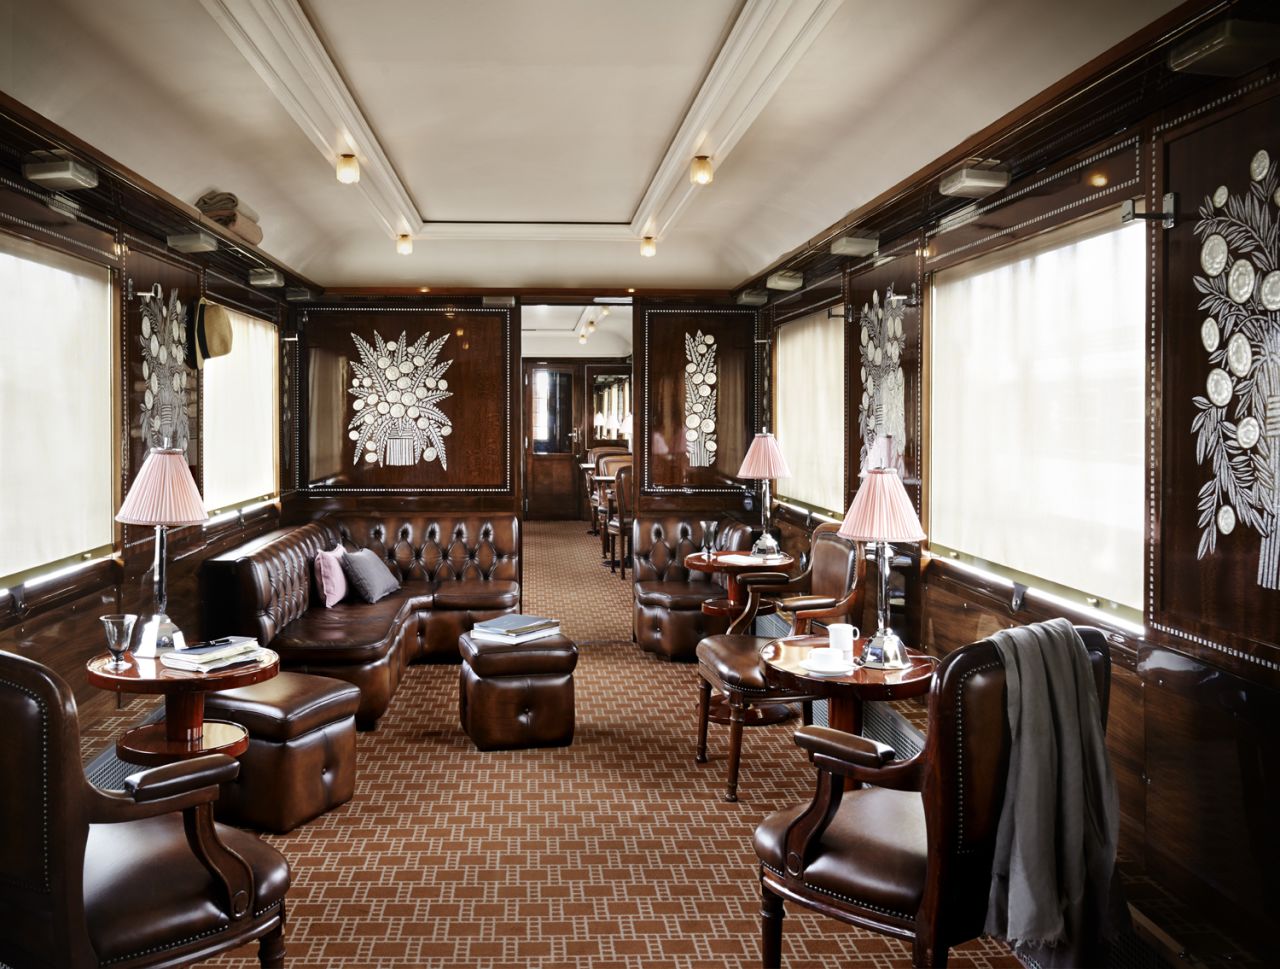 Organized by the World Arab Institute and the French national rail company SNCF, the exhibition highlights the luxury that travelers experienced  on board this icon of transport. The Train Bleu offers a view of a sumptuous salon, with books and newspapers strewn across its mahogany tables, and a coat left nonchalantly on a chair. 